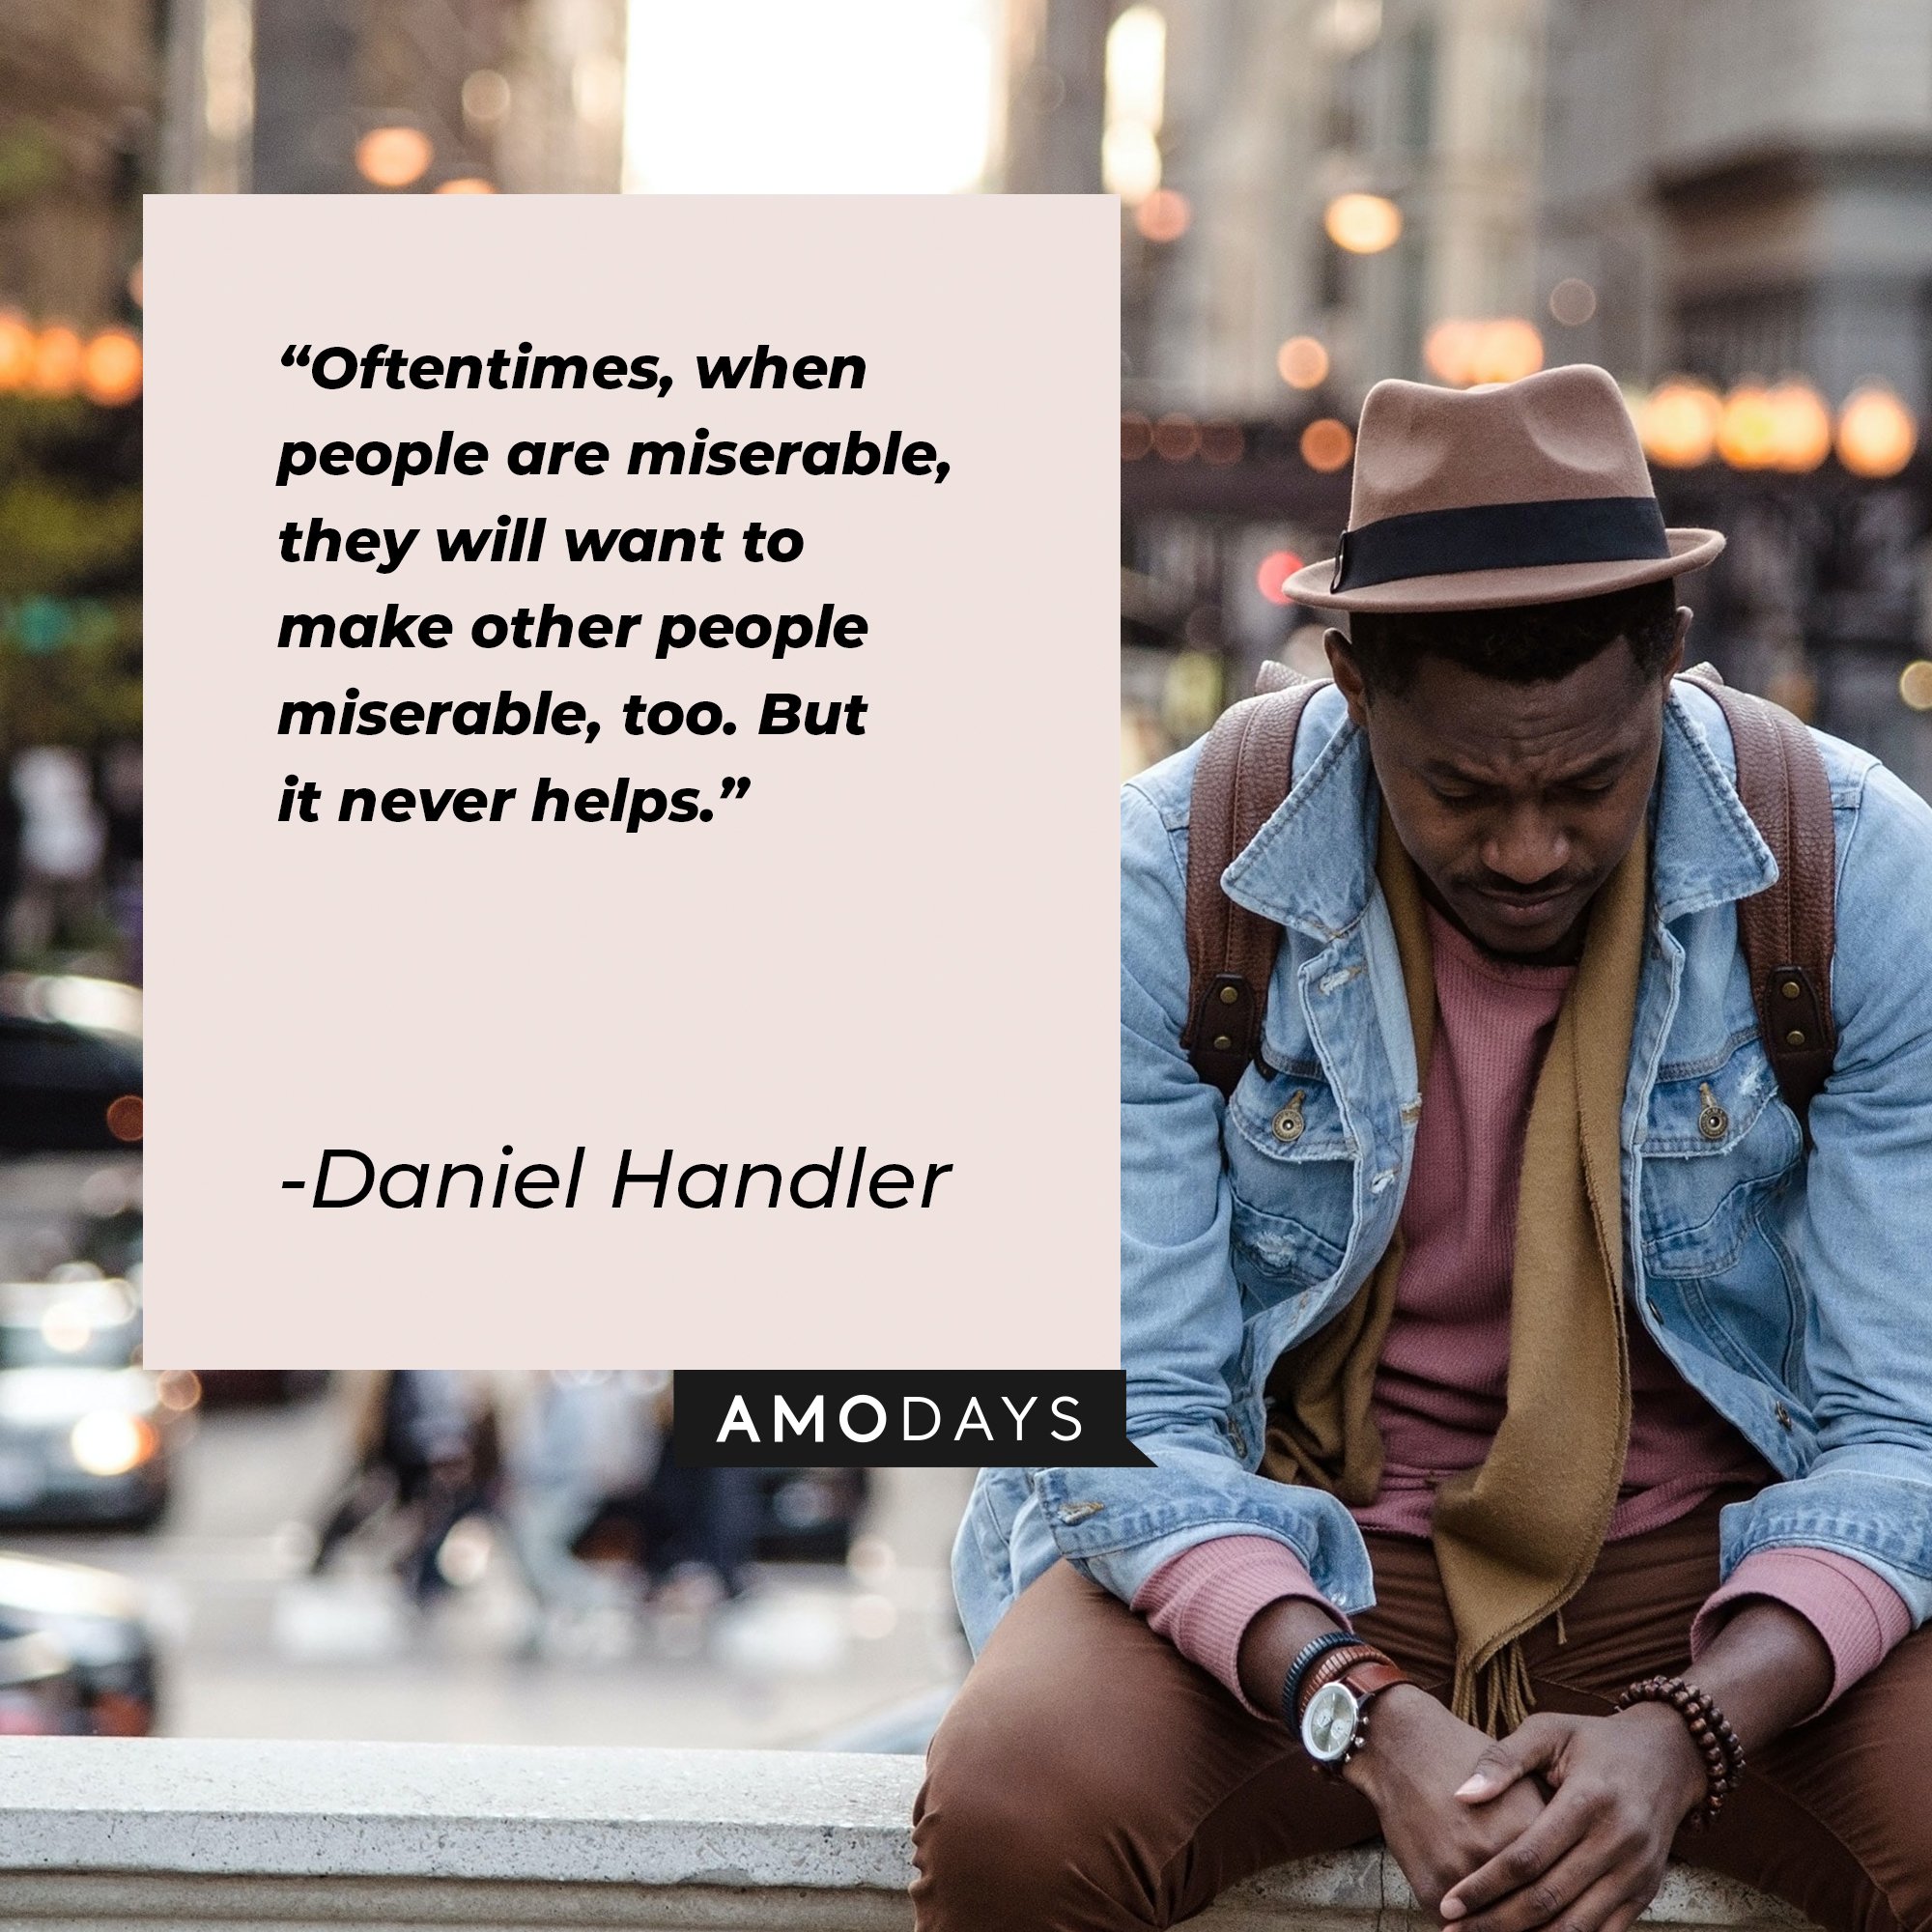  Daniel Handler’s quote: "Oftentimes, when people are miserable, they will want to make other people miserable, too. But it never helps." | Image: AmoDays